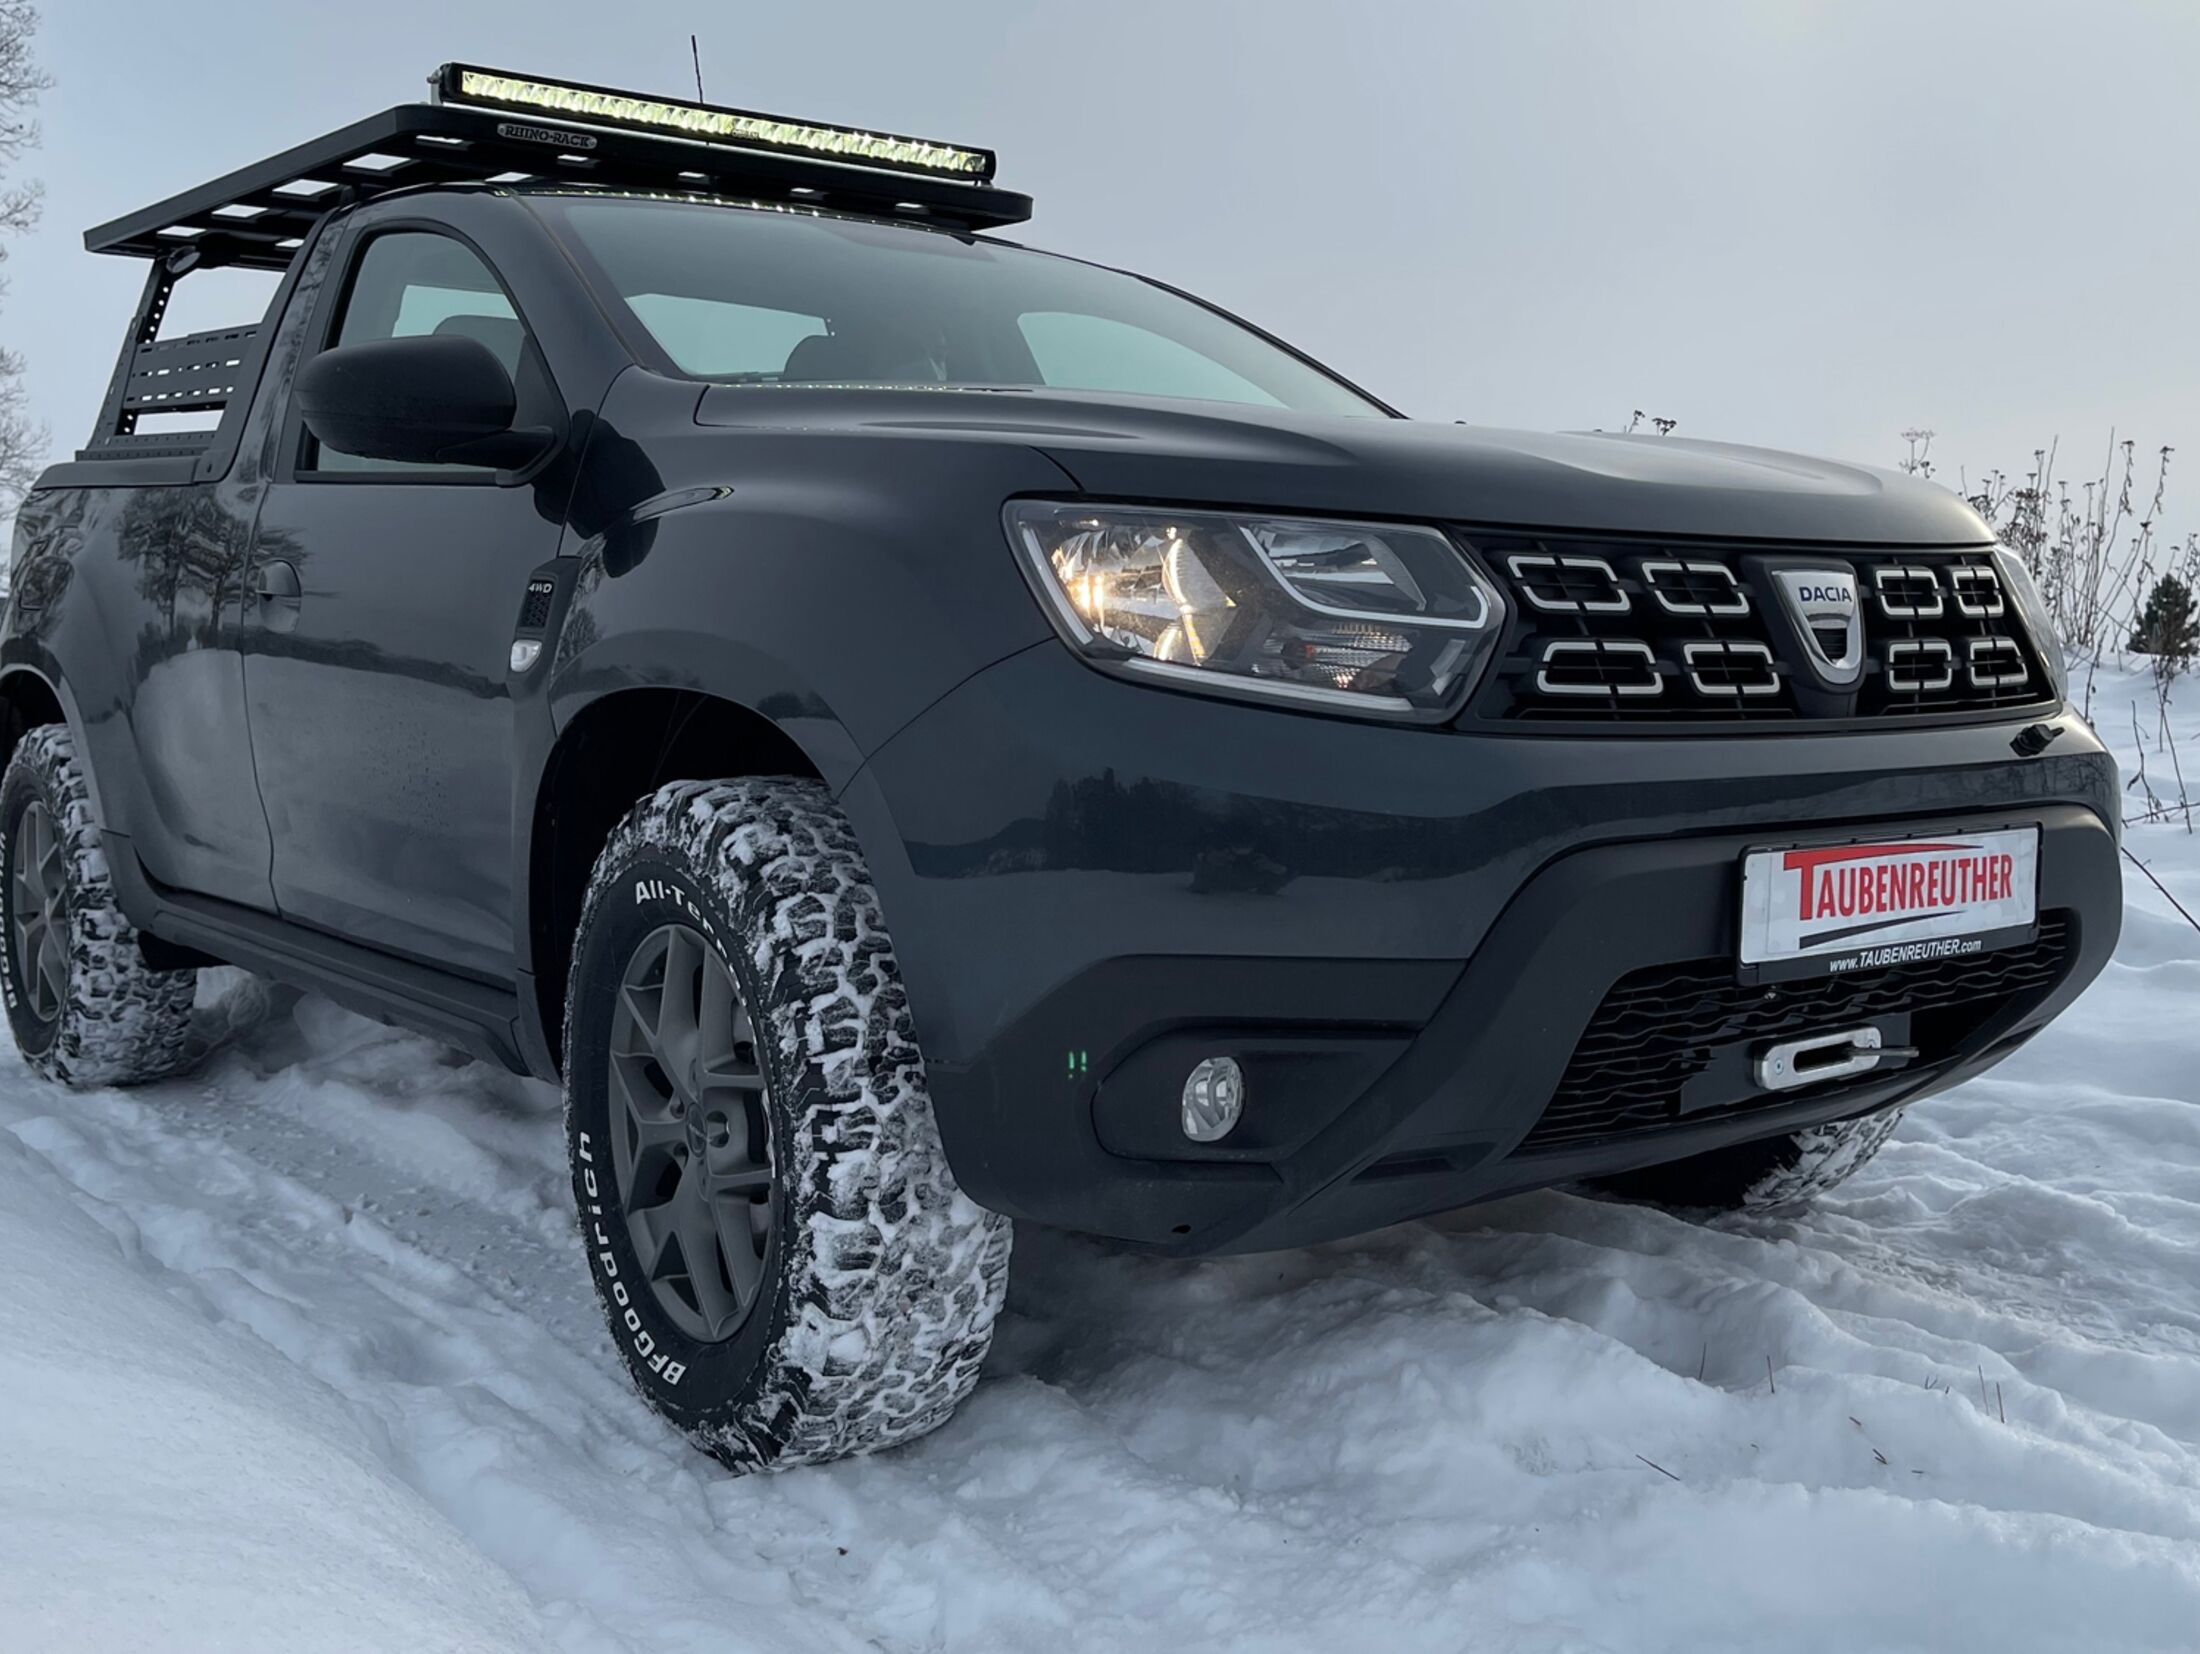 Dacia Duster Pickup mit Offroad-Tuning